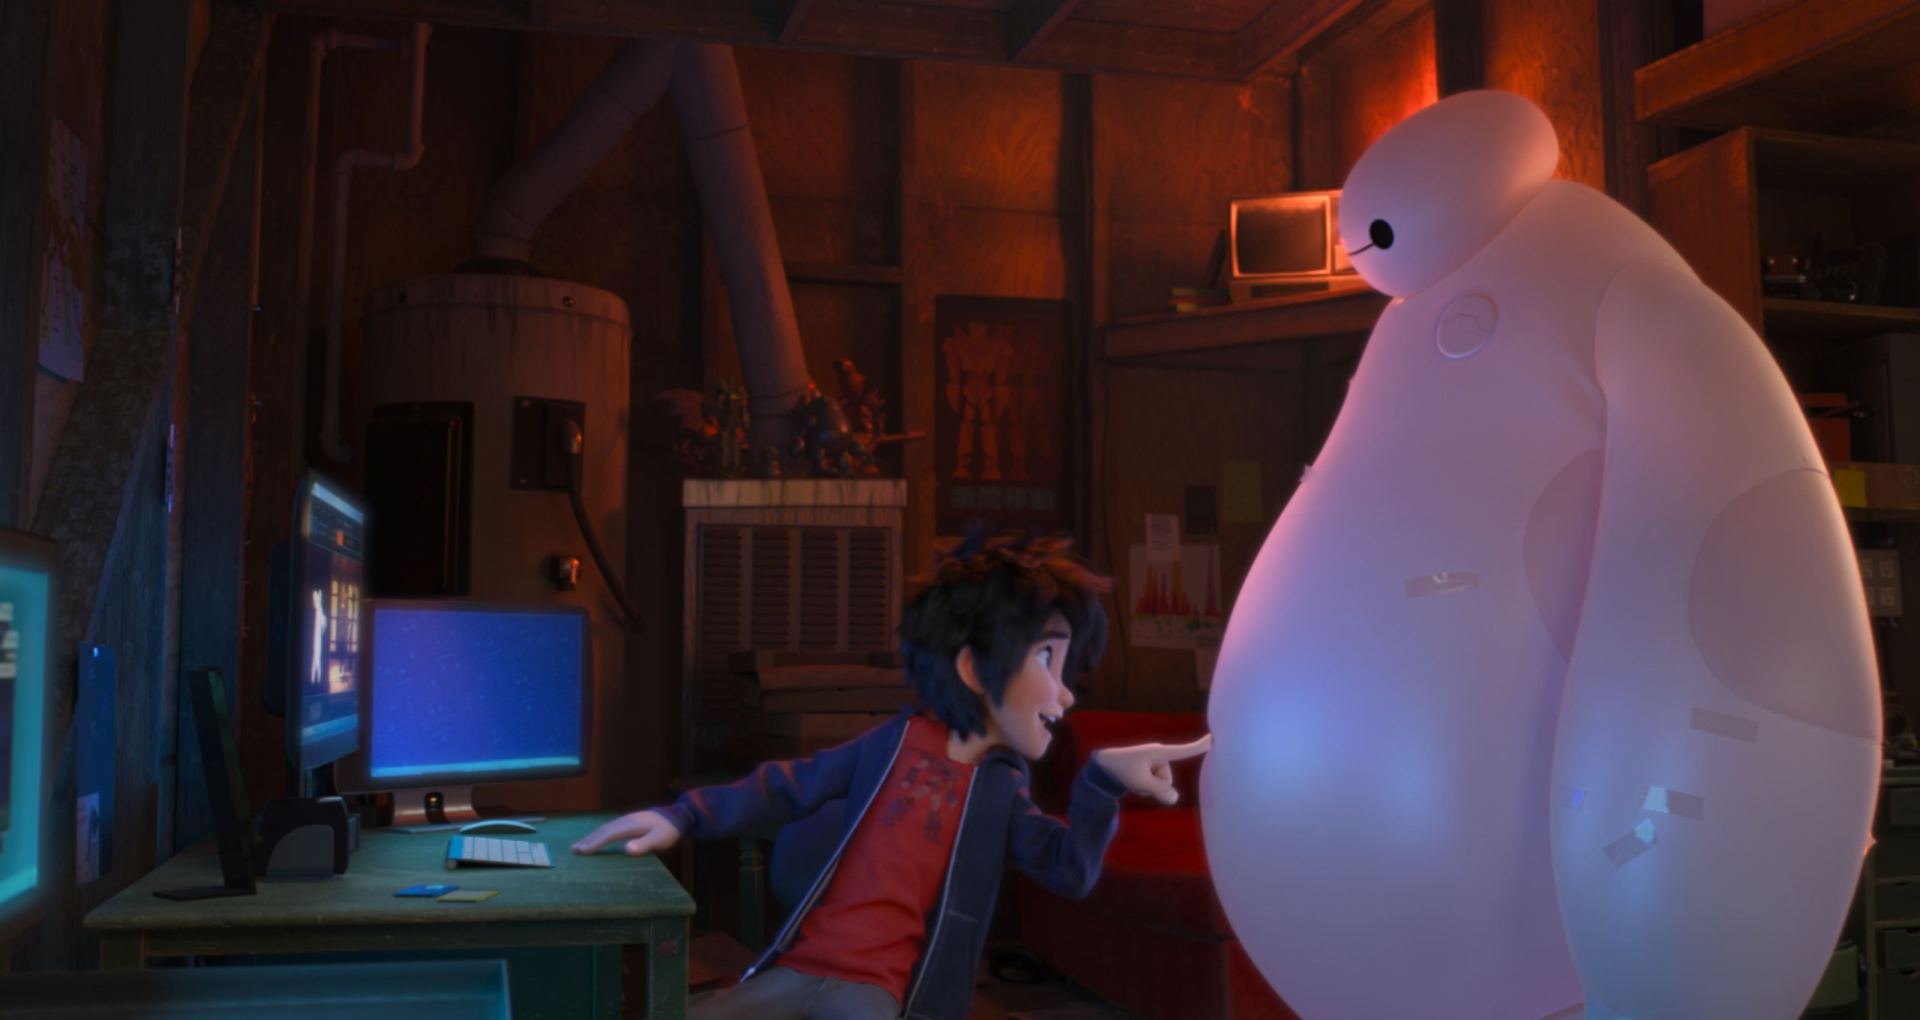 will there be a big hero 6 2